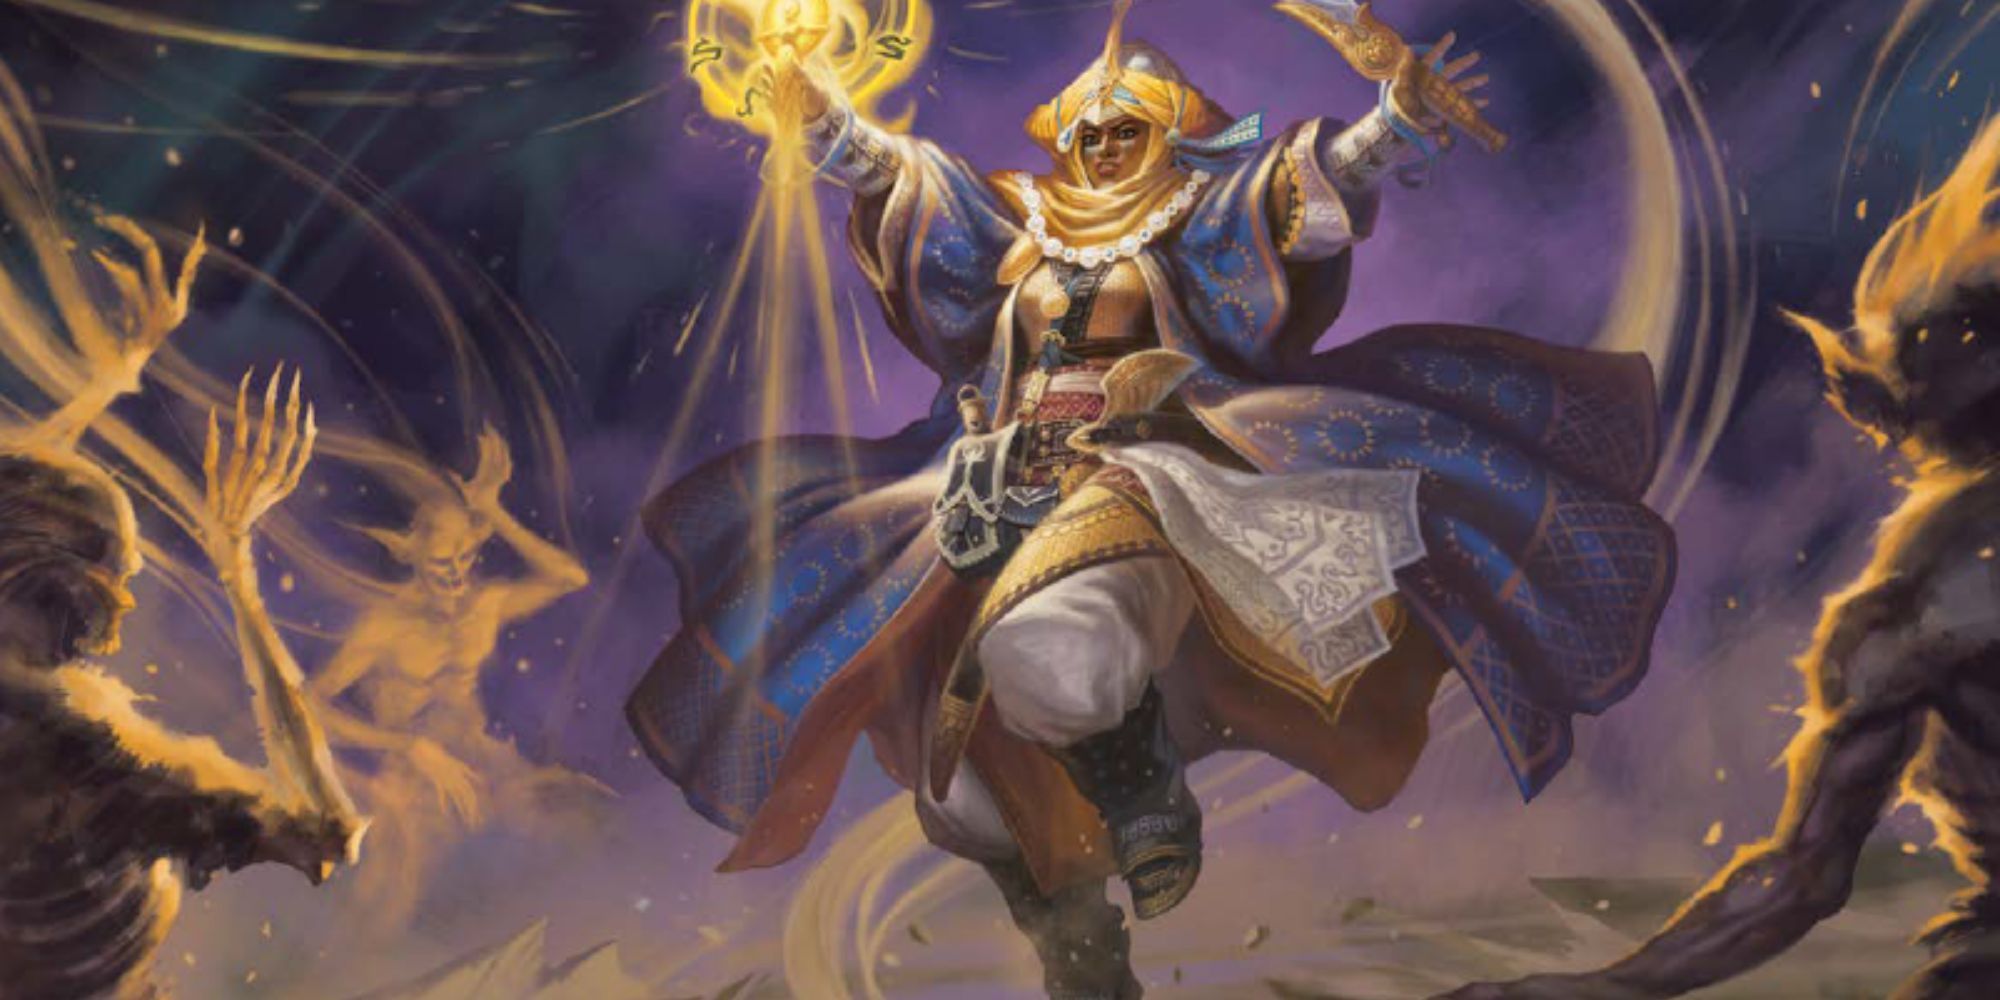 Kyra, The Cleric of Sarenrae channels holy energy to destroy undead